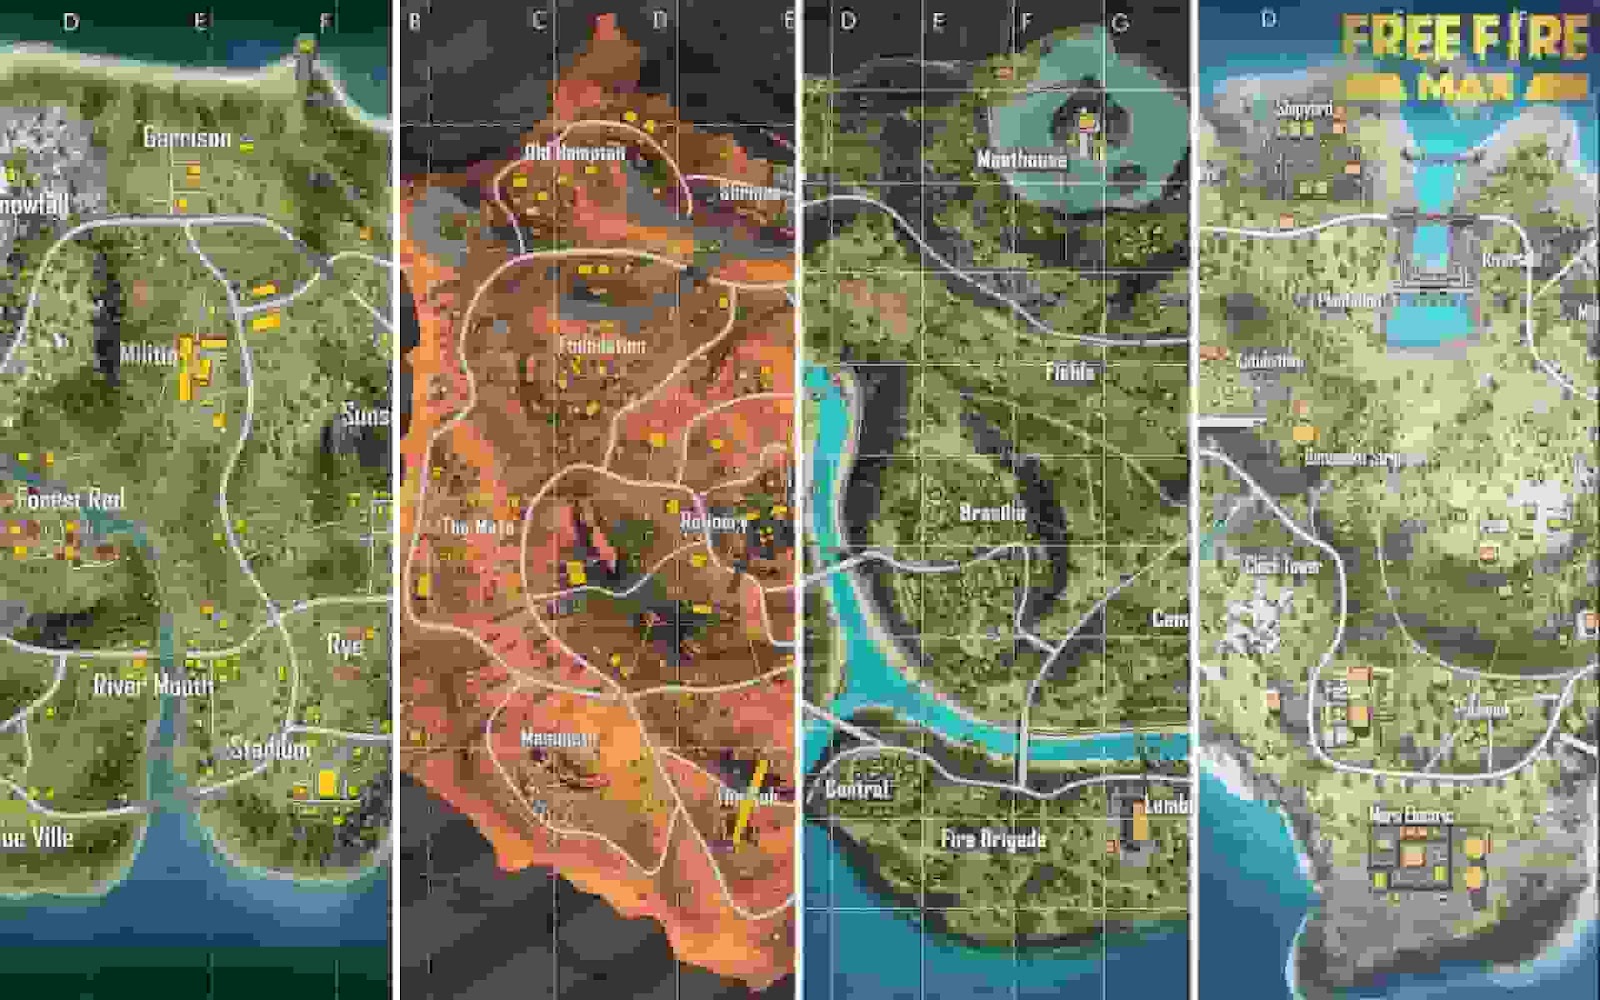 free fire max and apex legends mobile comparison, apex legends mobile characters, apex legends mobile features, apex legends mobile vs free fire max, free fire max maps, apex legends mobile gameplay